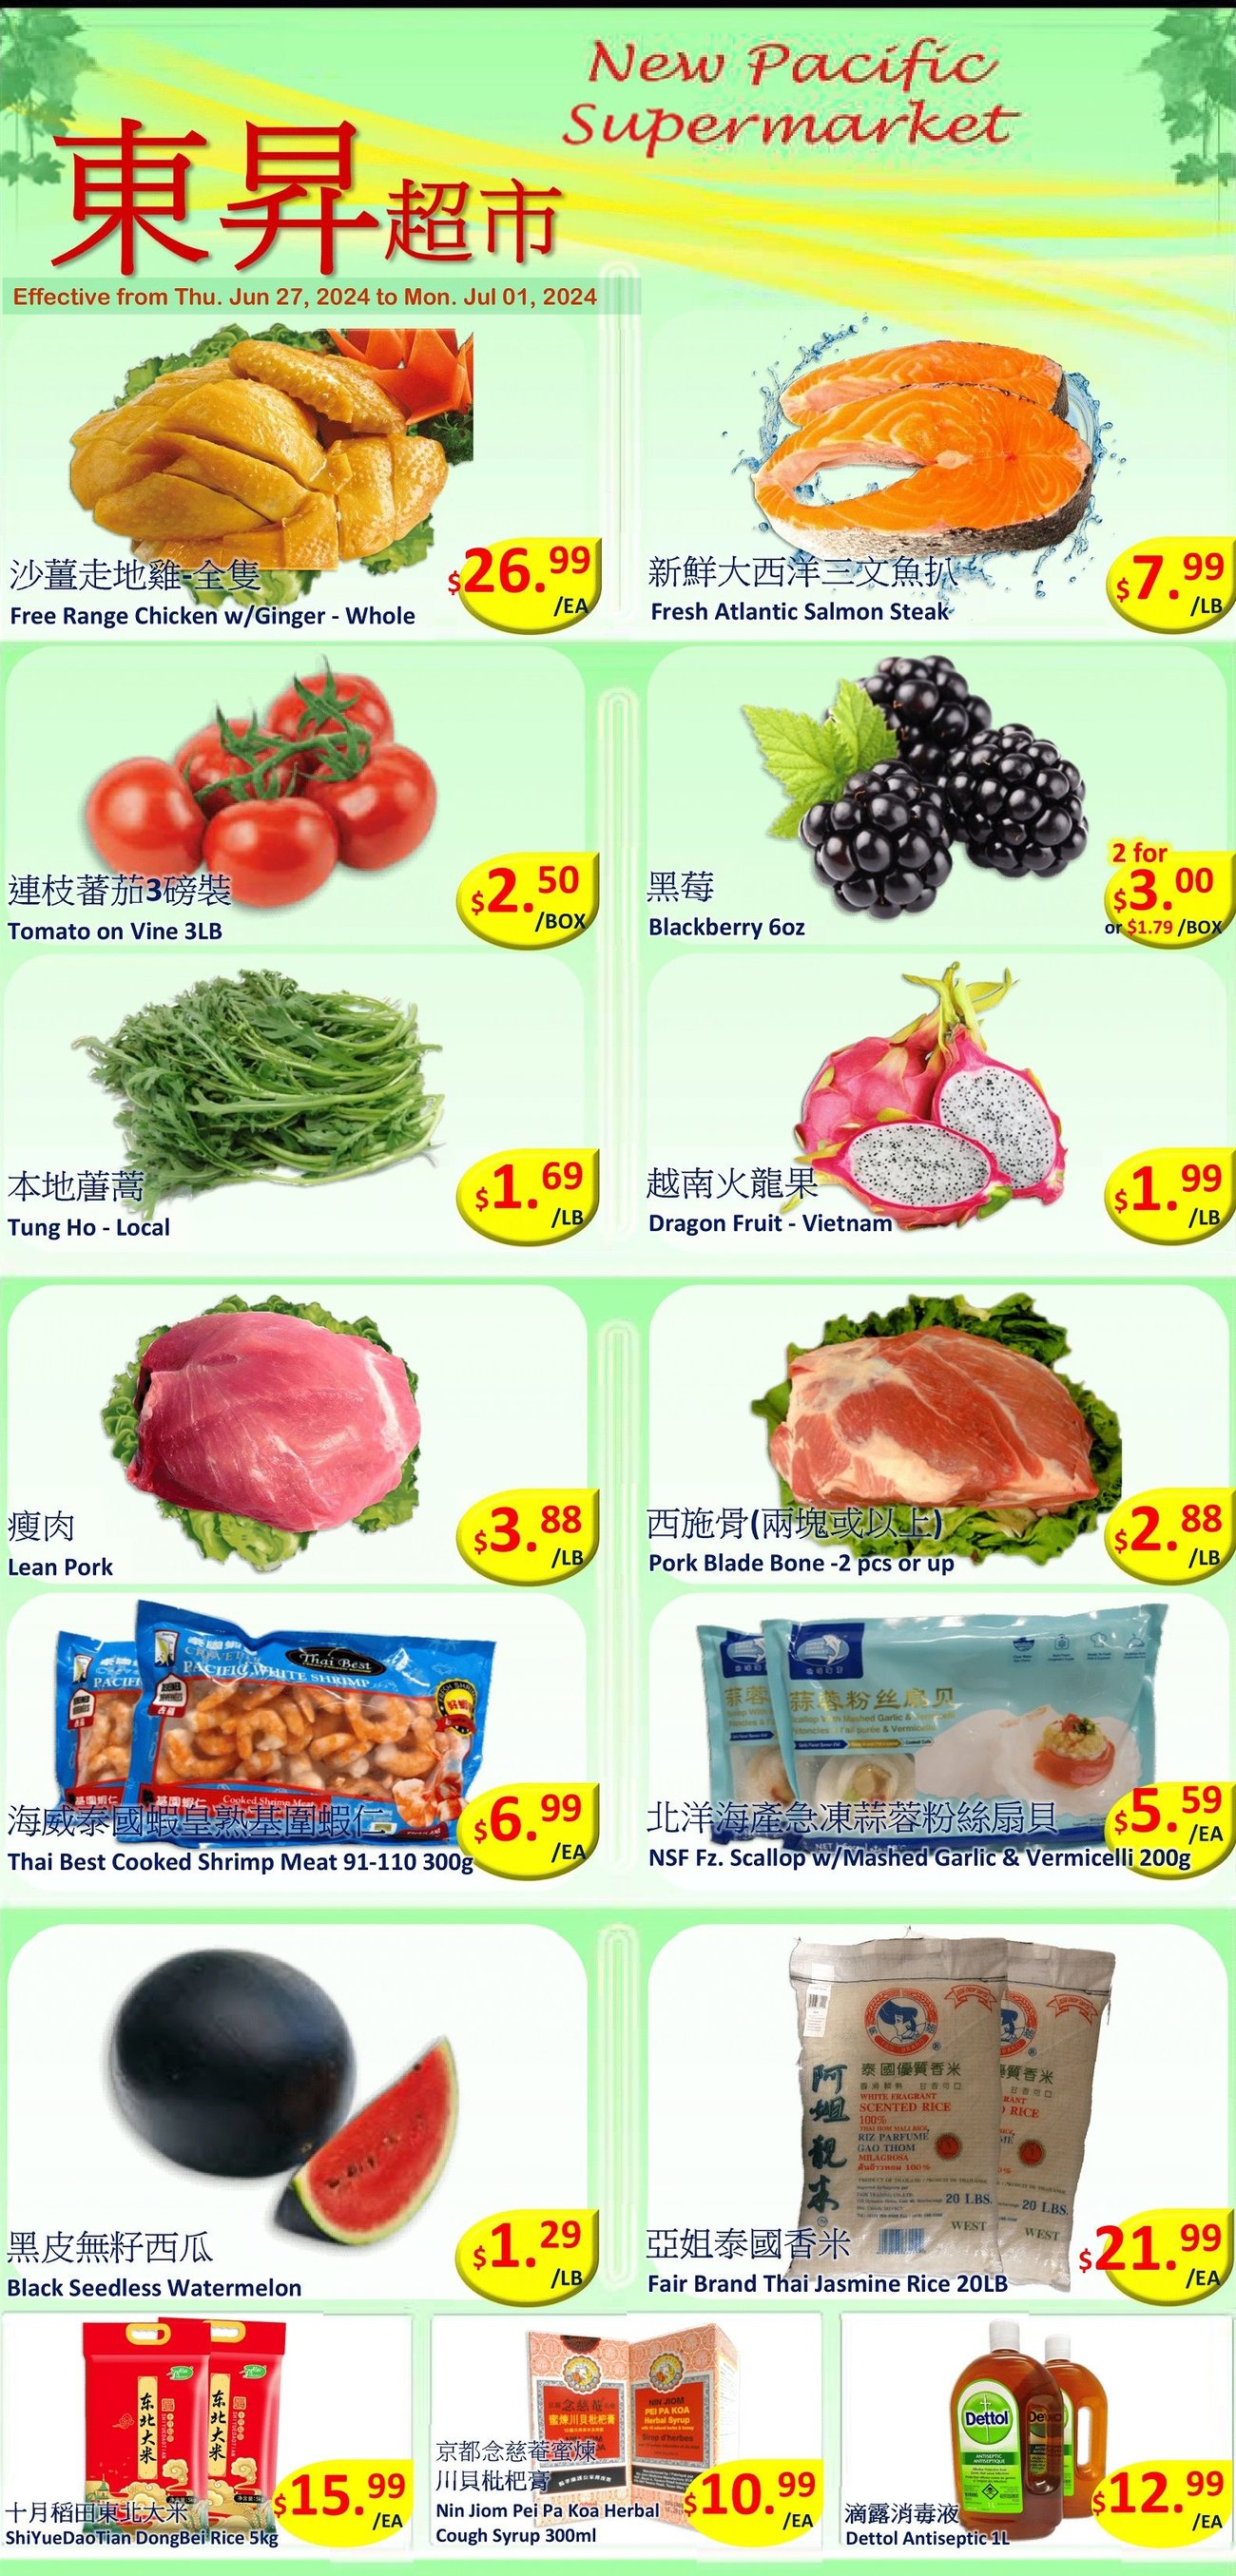 New Pacific Supermarket - Weekly Flyer Specials - Page 1